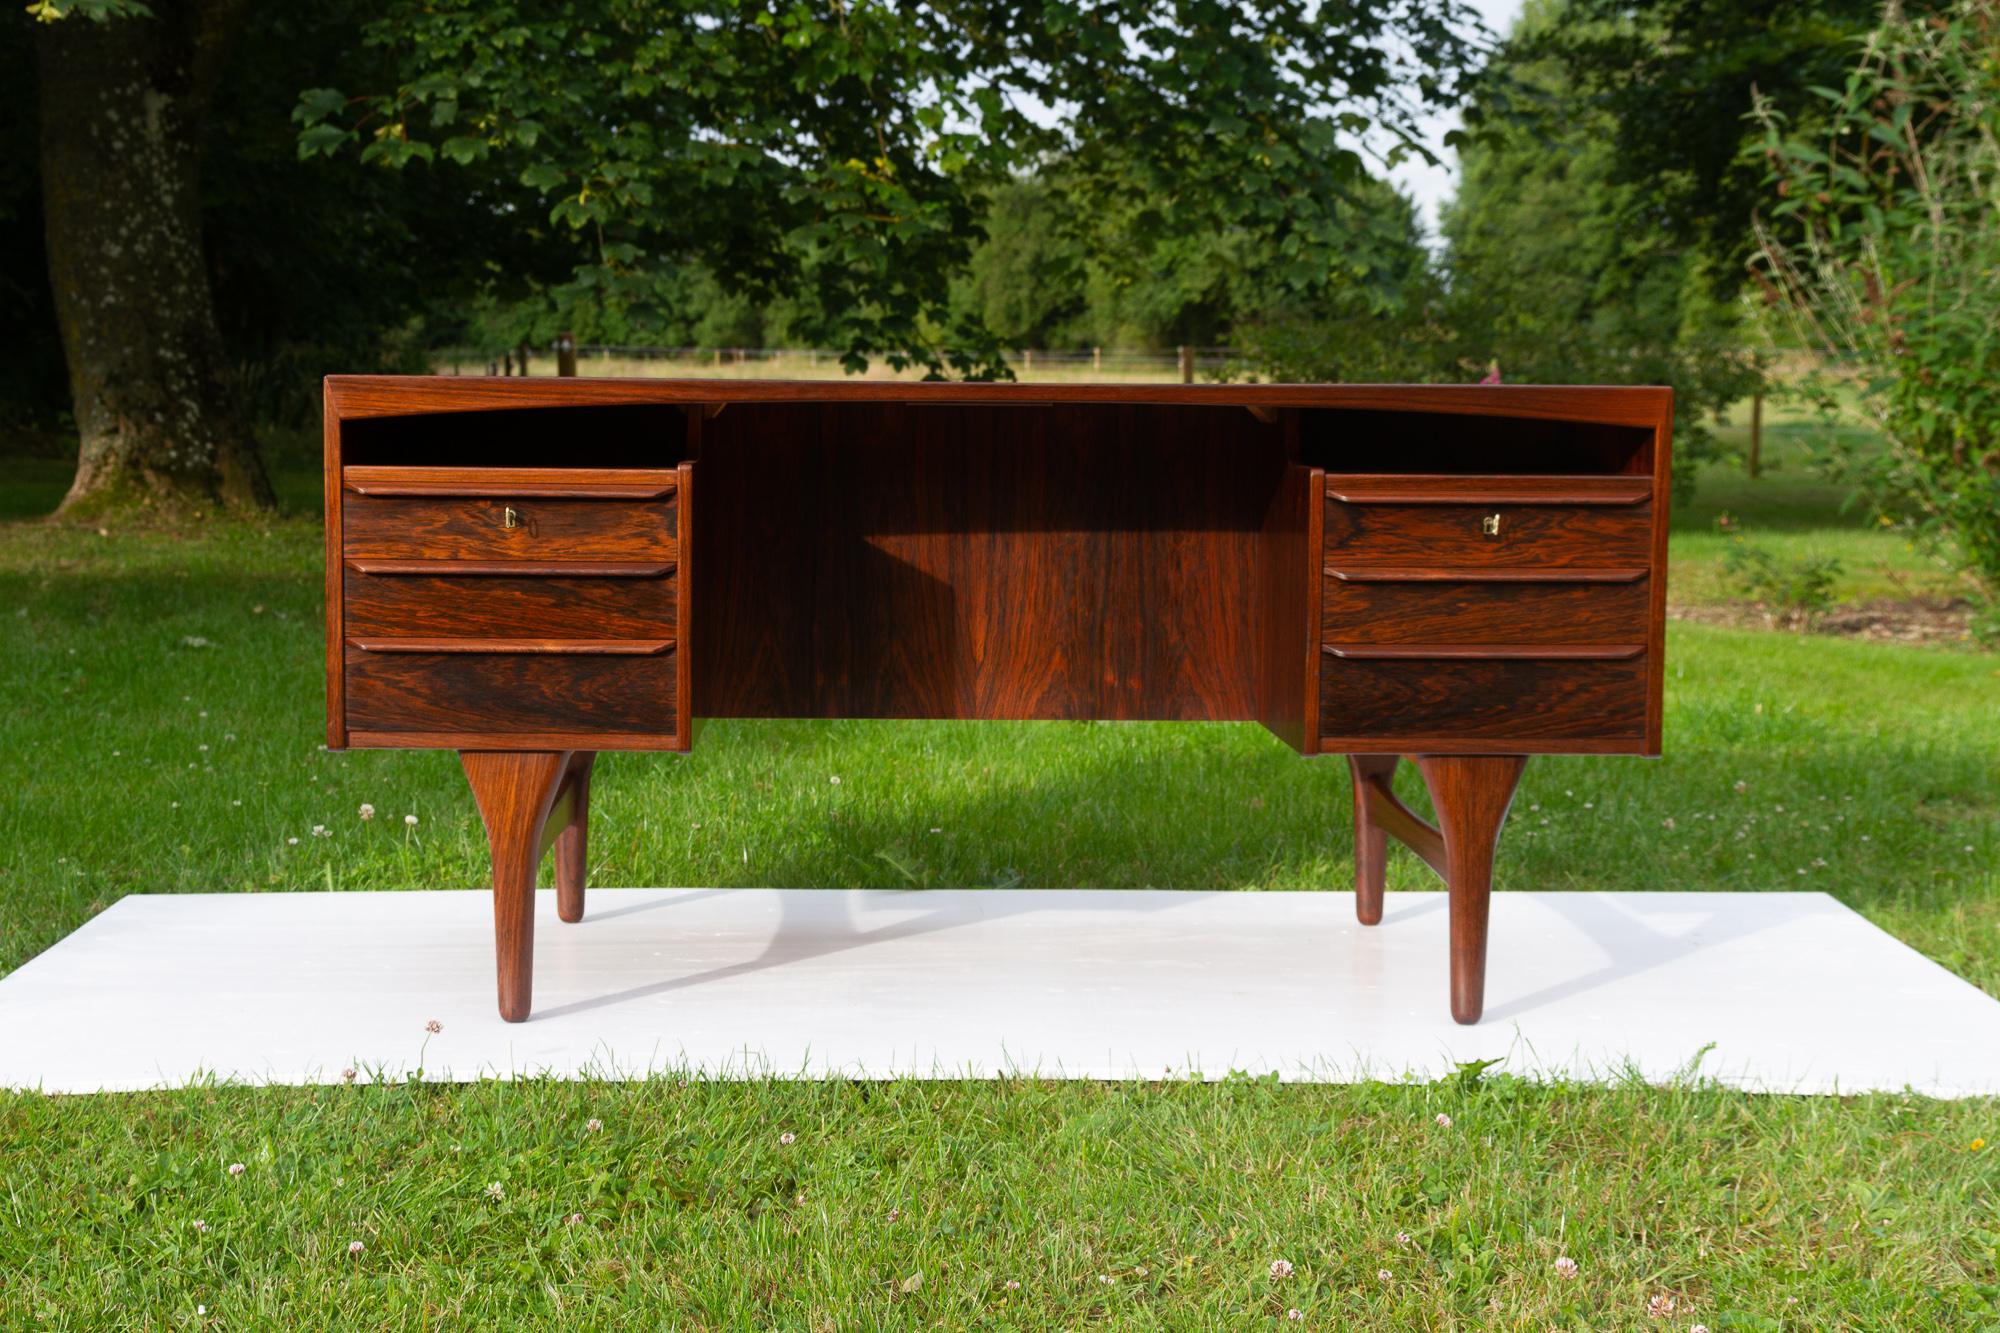 Danish Mid-Century Modern Rosewood Desk by Valdemar Mortensen, 1960s.
High end freestanding executive Rosewood desk by Danish master carpenter Valdemar Mortensen from Odense, Denmark.
Table top with arched trim and book matched veneer.
Front with